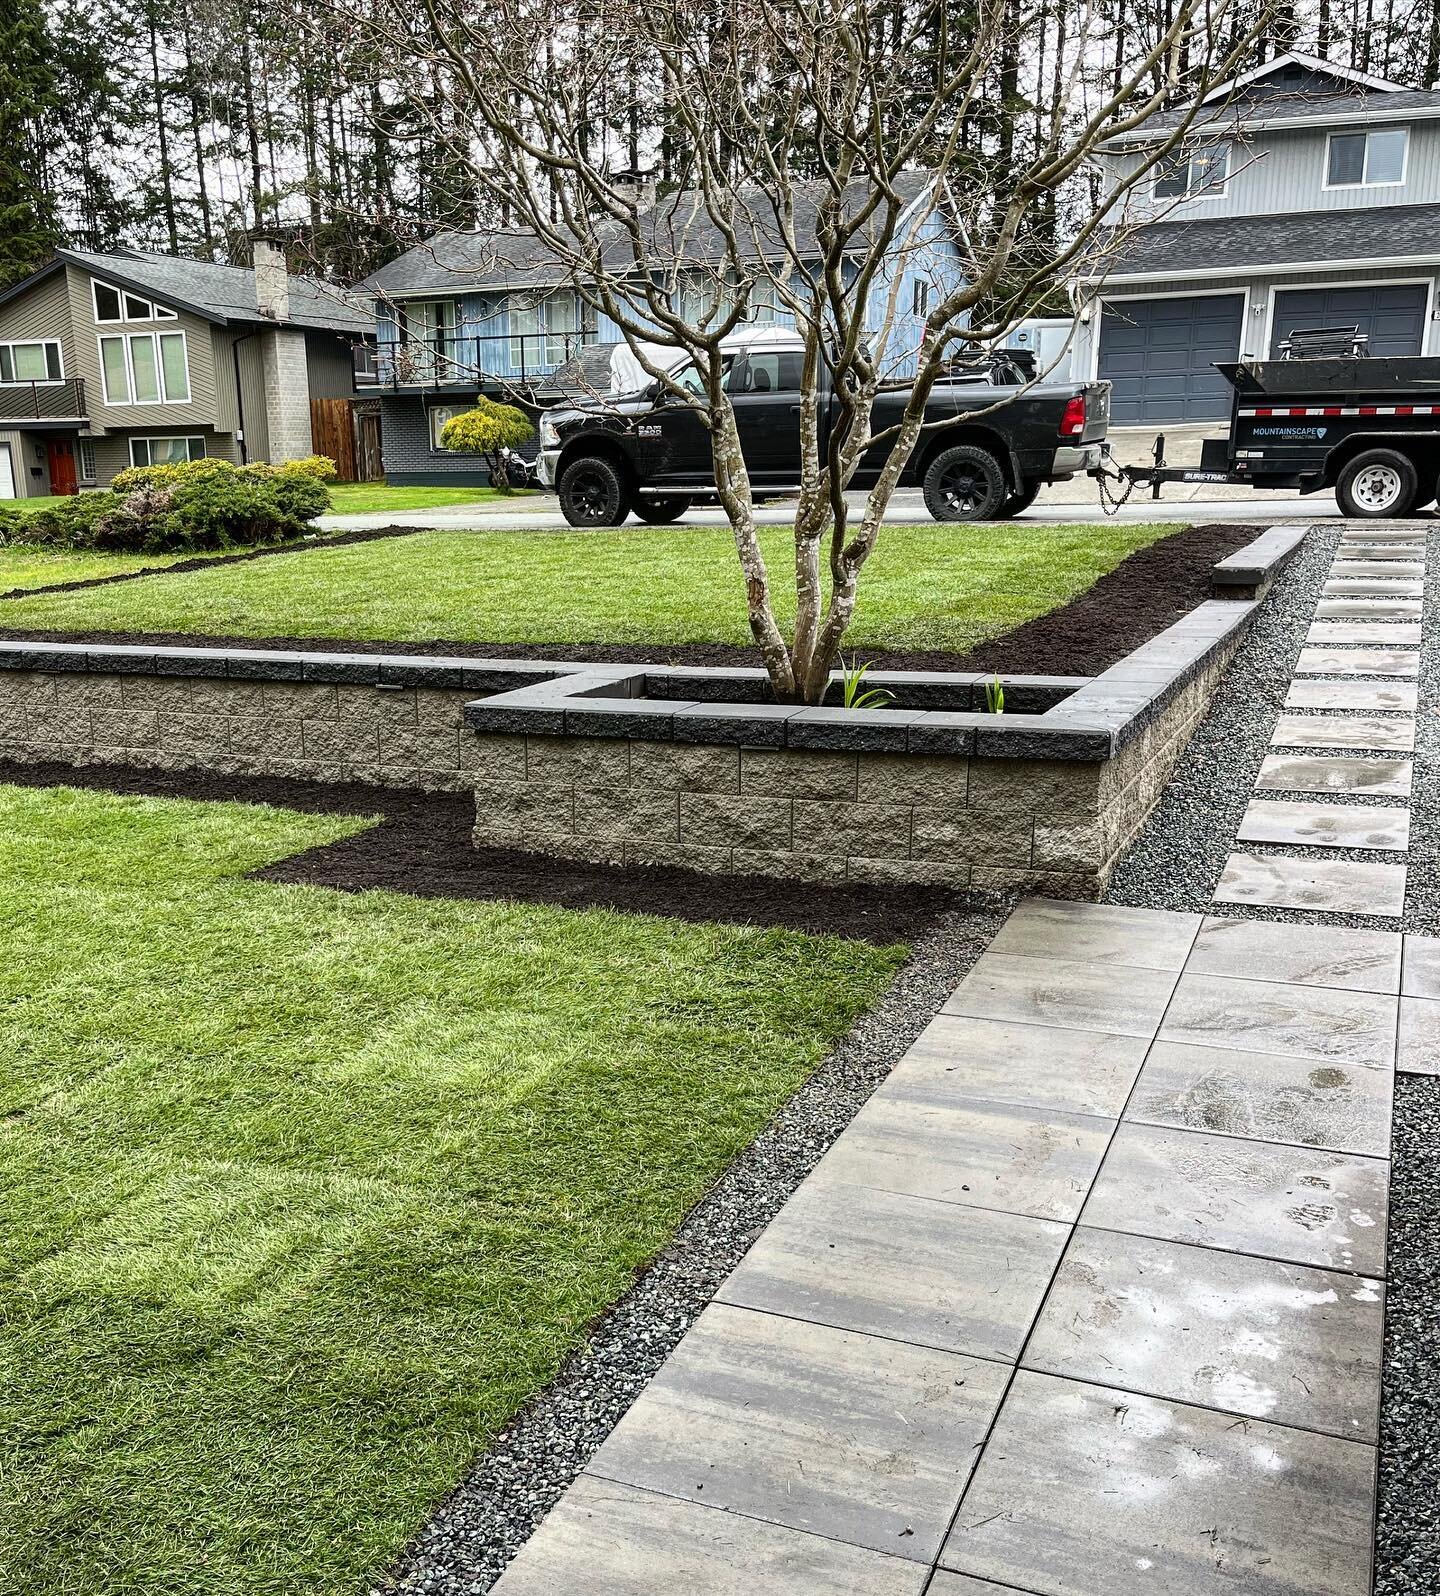 Clean and simple solution to a previously sloped yard. Tiered retaining wall and a low maintenance 2x2 path to the street. #mountainscape #basalite @basaliteconcreteproducts @belgardcanada #pavers #howtohardscape #hardscape #landscape #potd #igers #t